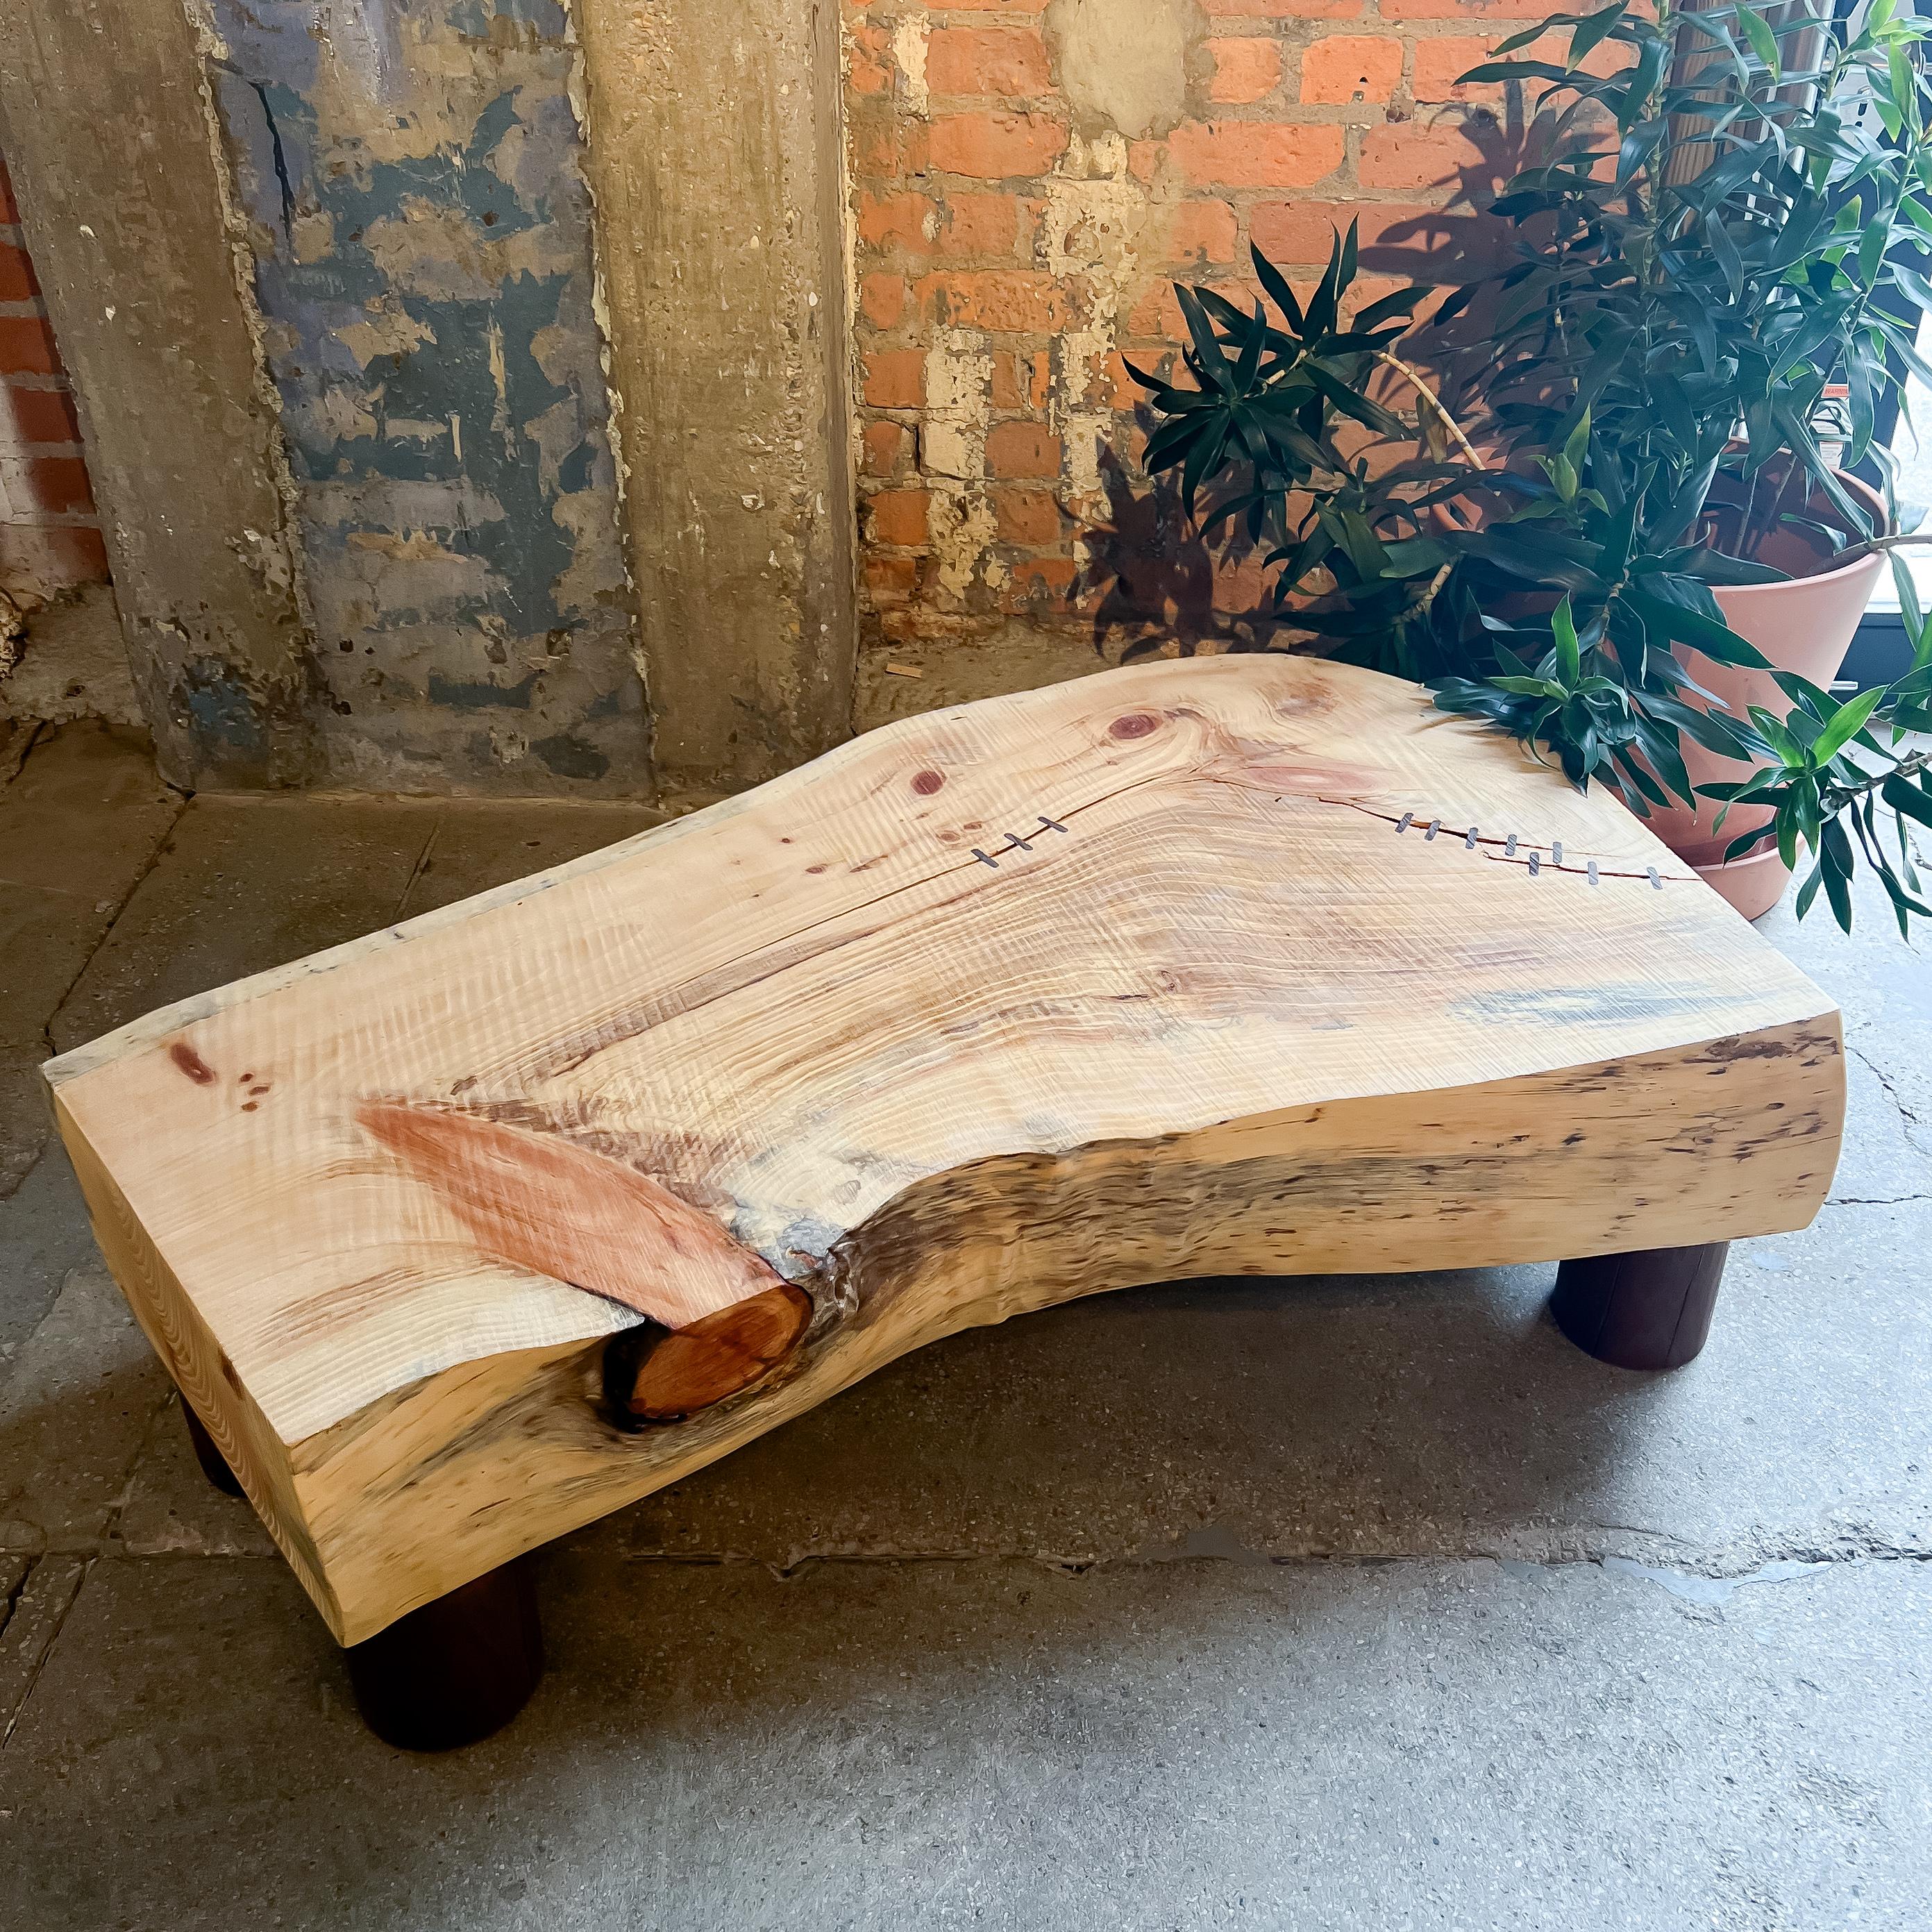 Intricate wooden table in unique organic form with five legs.  The table top is made from White Pine with natural accenting throughout due to the saw-milling processes.  Walnut is used for the short cylindrical legs that also have prominent natural